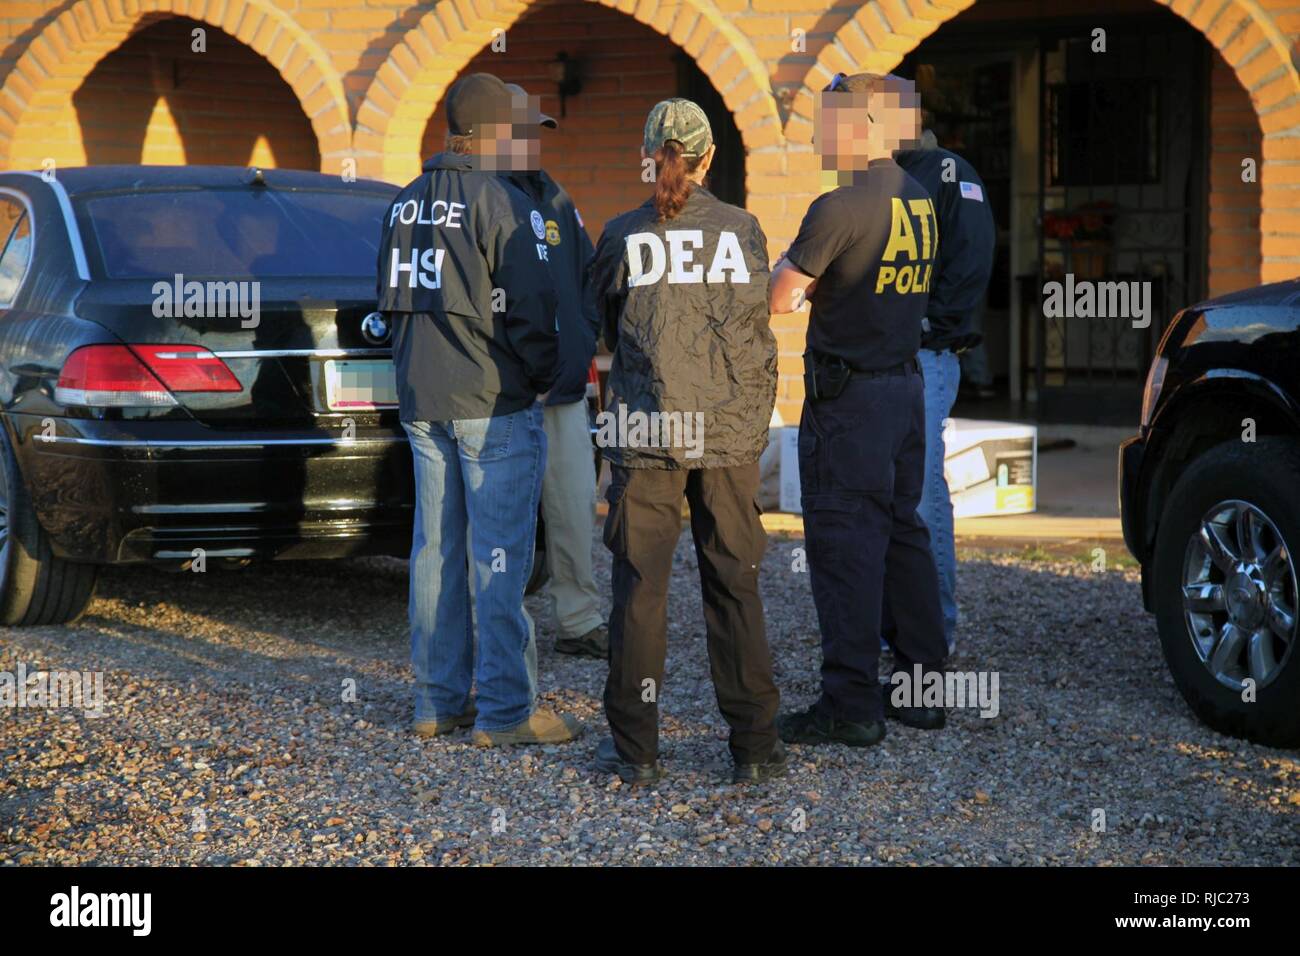 Investigators from multiple federal and local law enforcement agencies, including U.S. Immigration and Customs Enforcement’s (ICE) Homeland Security Investigations (HSI), the Drug enforcement Administration, and the Pima County Sheriff’s Department, executed numerous search and arrest warrants in southern Arizona Thursday, dismantling a local drug trafficking organization suspected of distributing and selling heroin, marijuana, and various firearms. Stock Photo